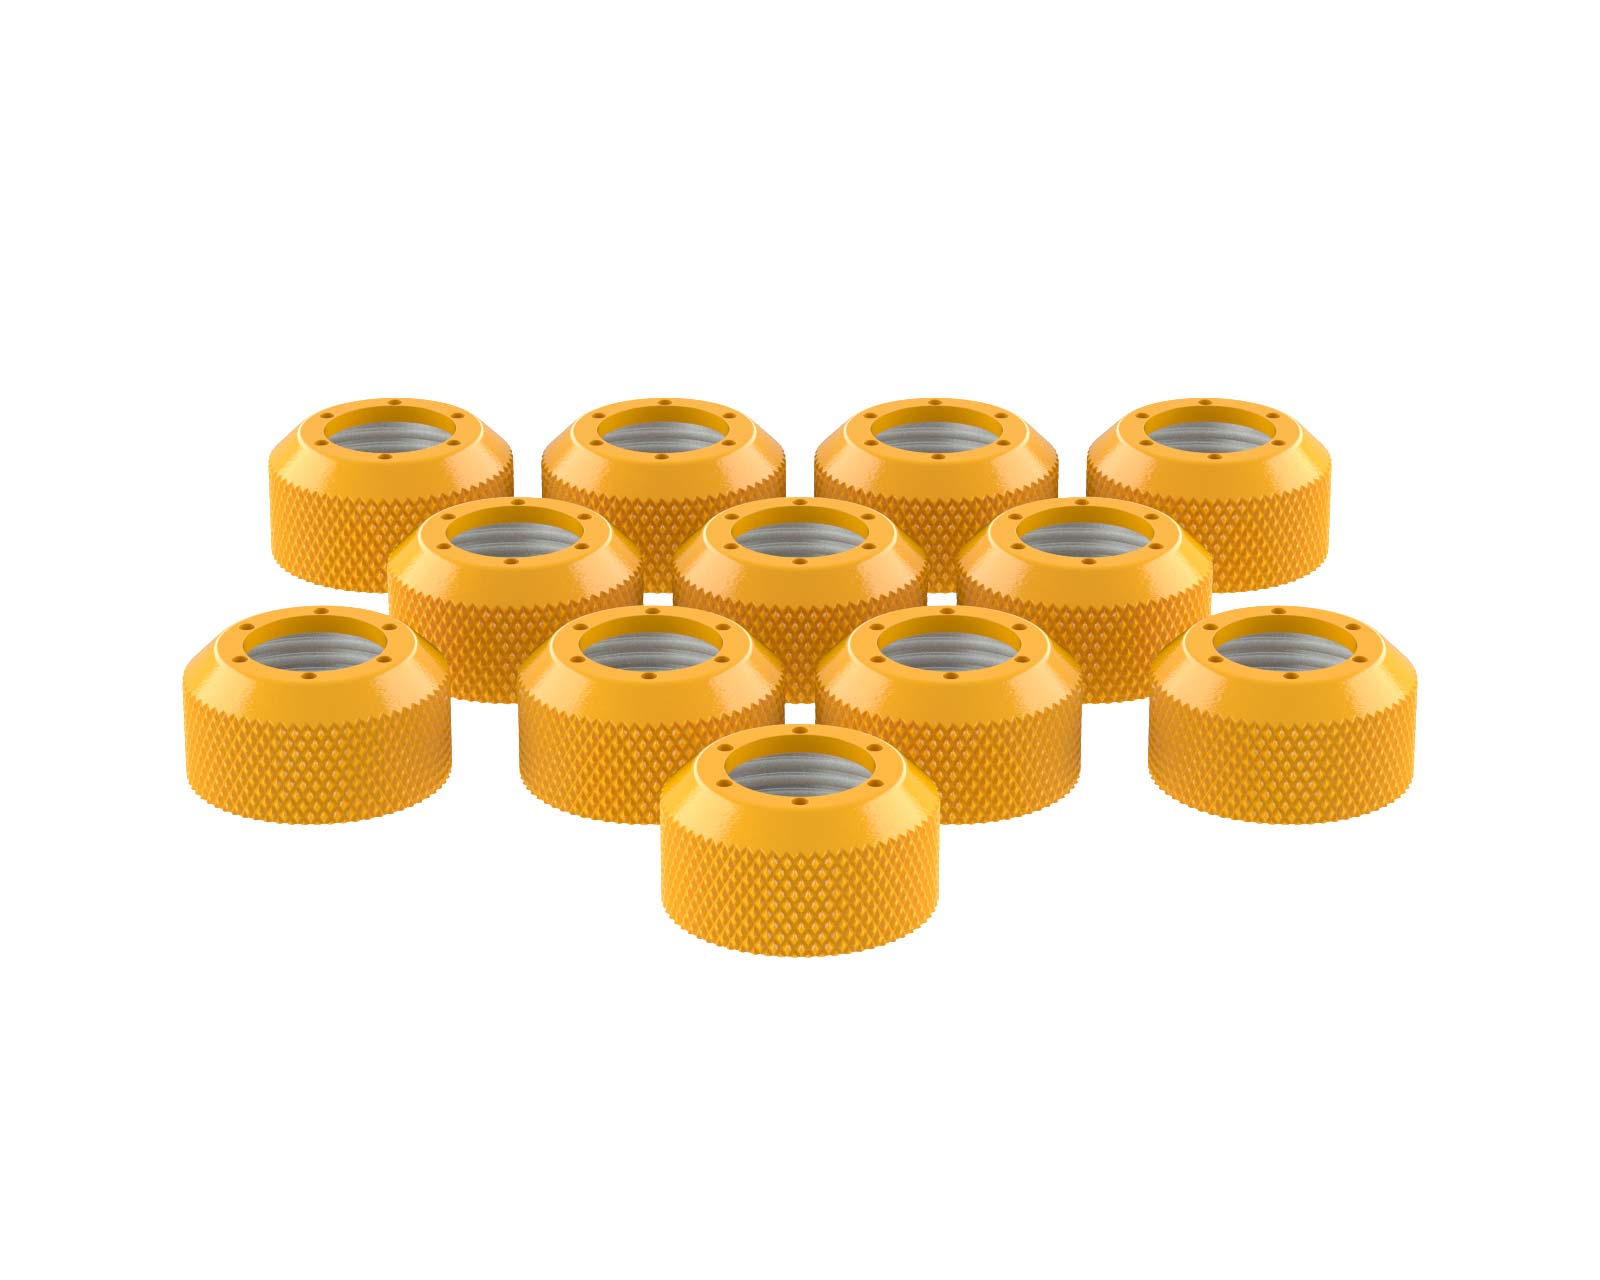 PrimoChill RSX Replacement Cap Switch Over Kit - 1/2in. - PrimoChill - KEEPING IT COOL Yellow